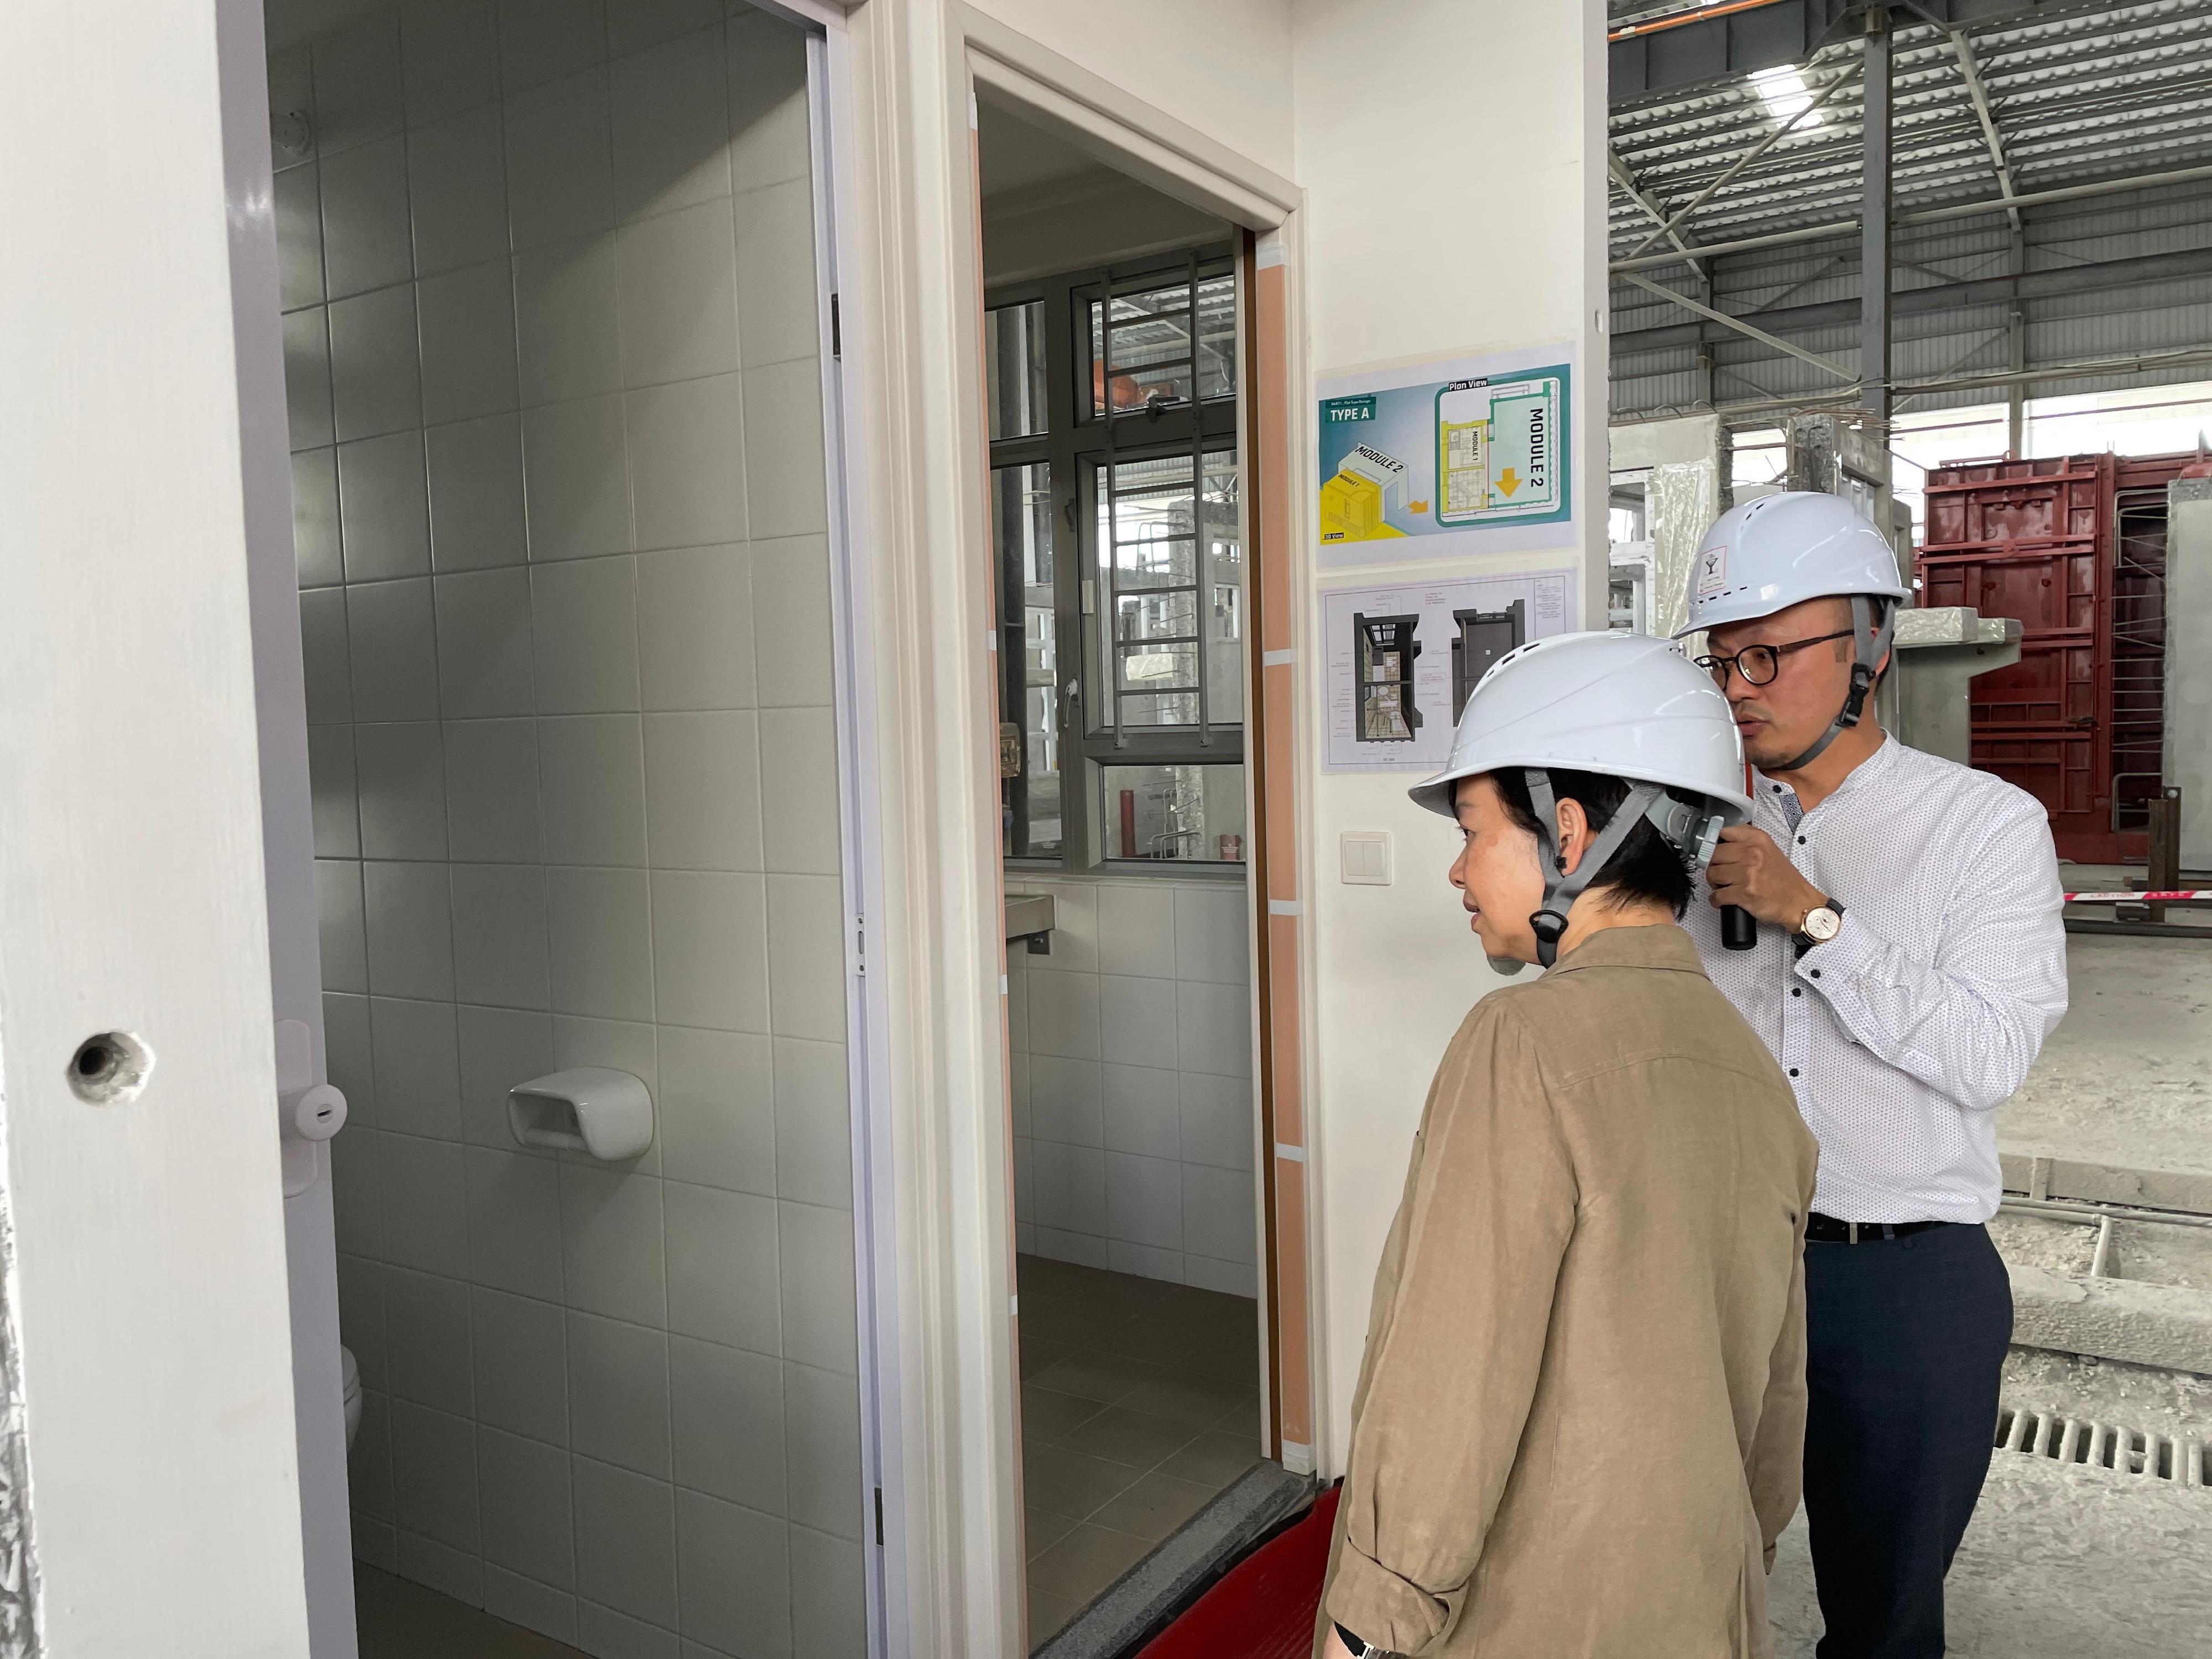 The Secretary for Housing, Ms Winnie Ho, and a delegation of representatives from the Housing Bureau and the Architectural Services Department visited Huizhou today (March 25) to inspect the production progress of Modular Integrated Construction (MiC) modules of Light Public Housing. Photo shows Ms Ho (left) visiting the factory of a Hong Kong enterprise, Yau Lee Wah Construction Materials (Huizhou) Company Limited, in the afternoon to inspect MiC modules for public housing projects of the Hong Kong Housing Authority.